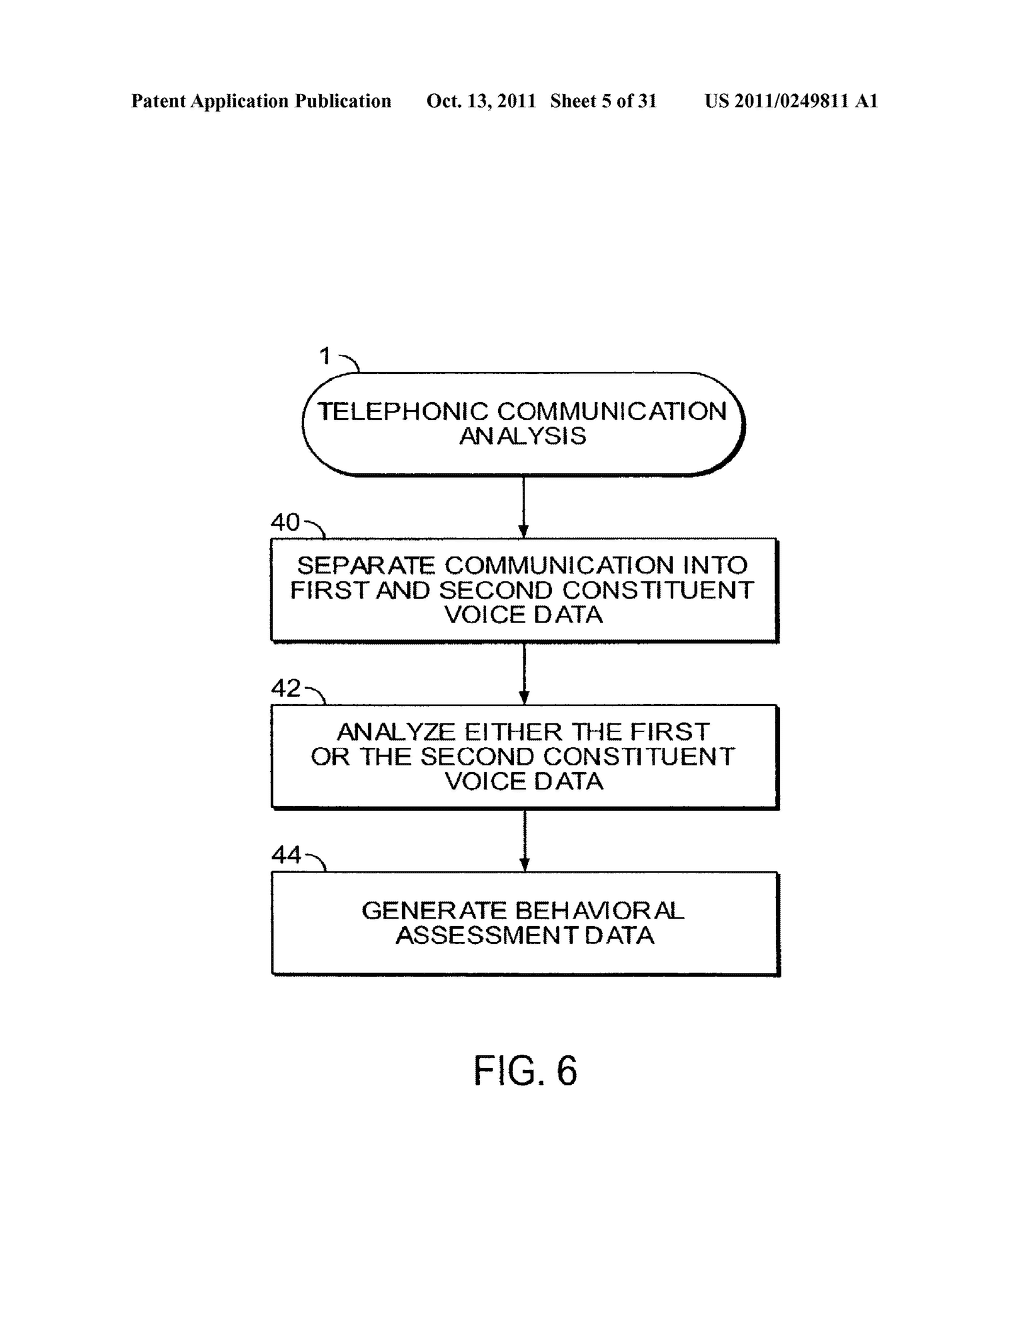 Method and System for Analyzing Separated Voice Data of a Telephonic     Communication Between a Customer and a Contact Center by Applying a     Psychological Behavioral Model Thereto - diagram, schematic, and image 06